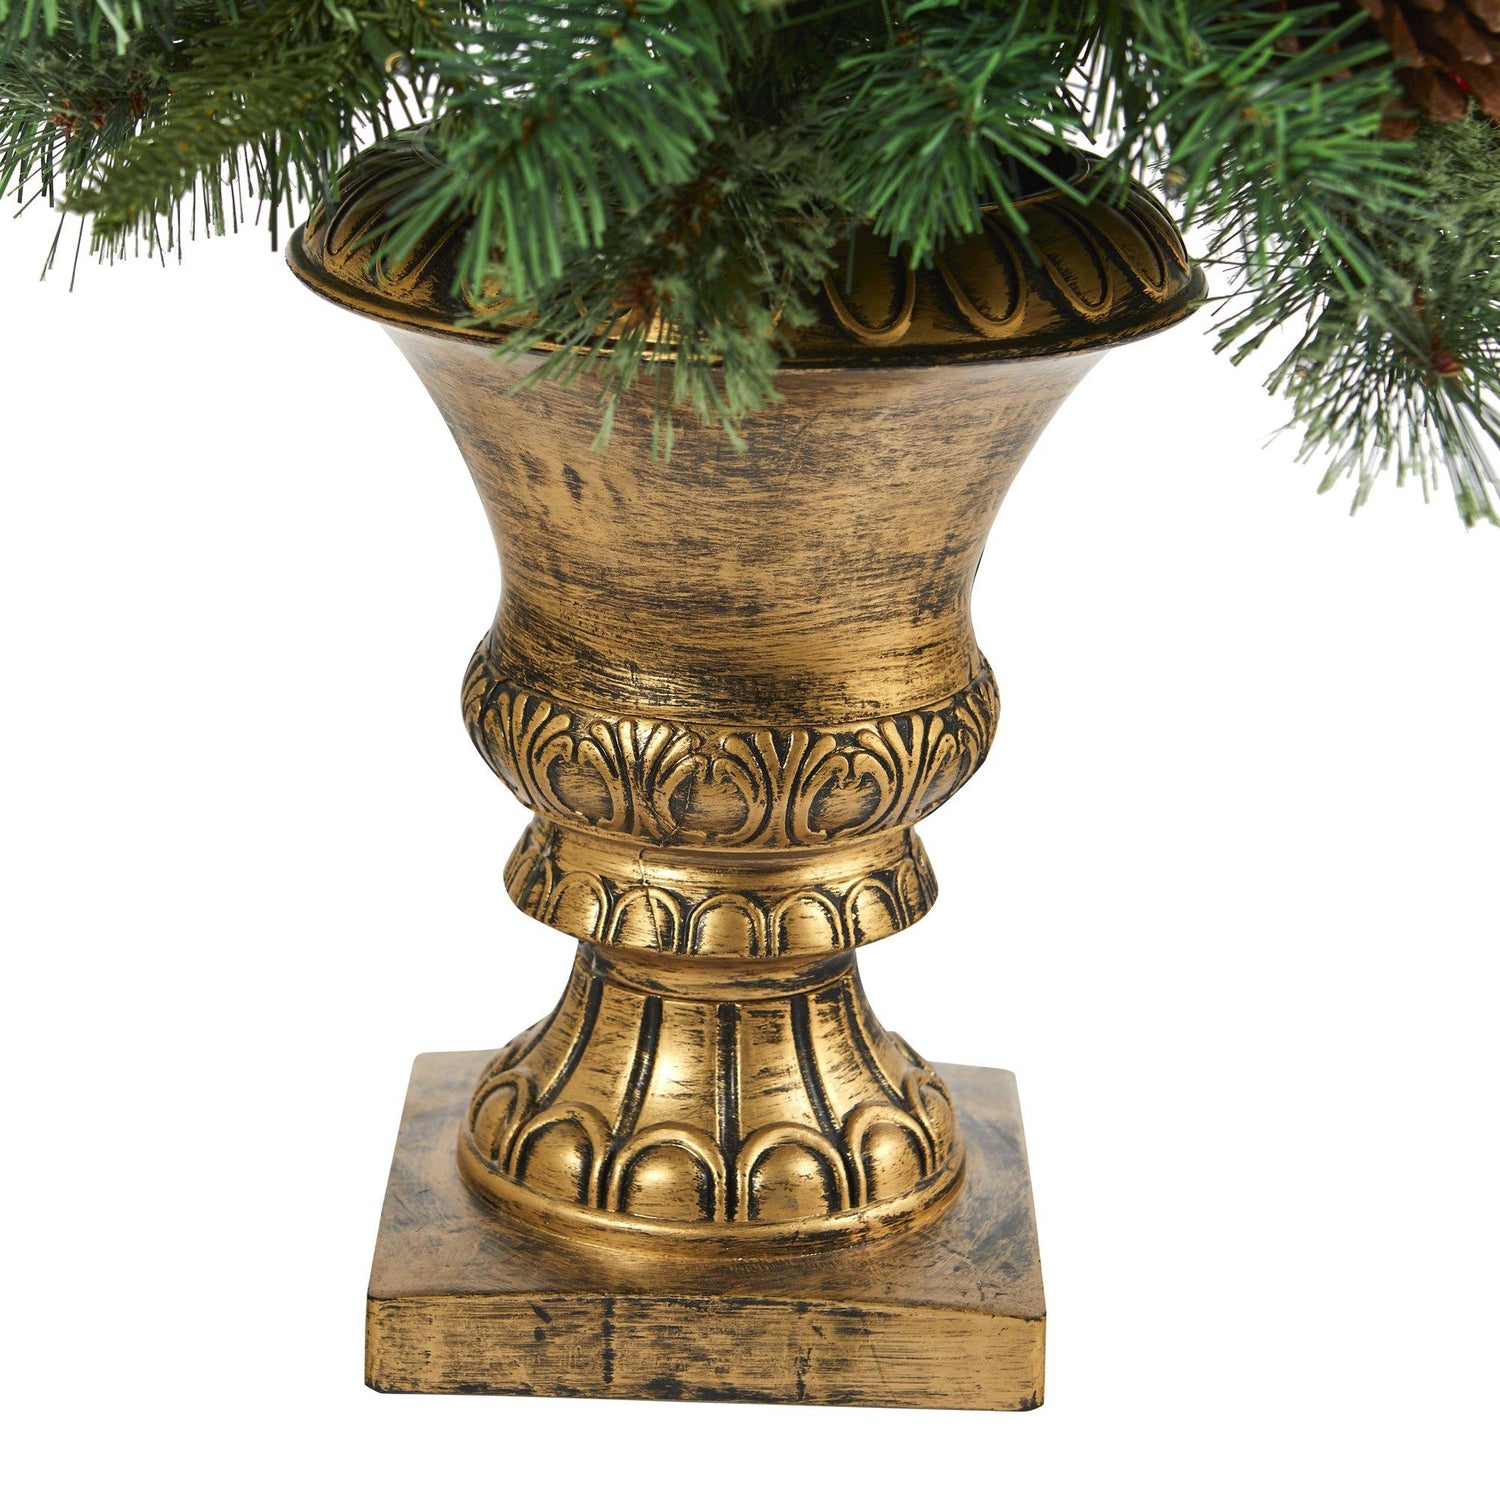 4’ Pine, Pinecone and Berries Artificial Christmas Tree in Decorative Urn